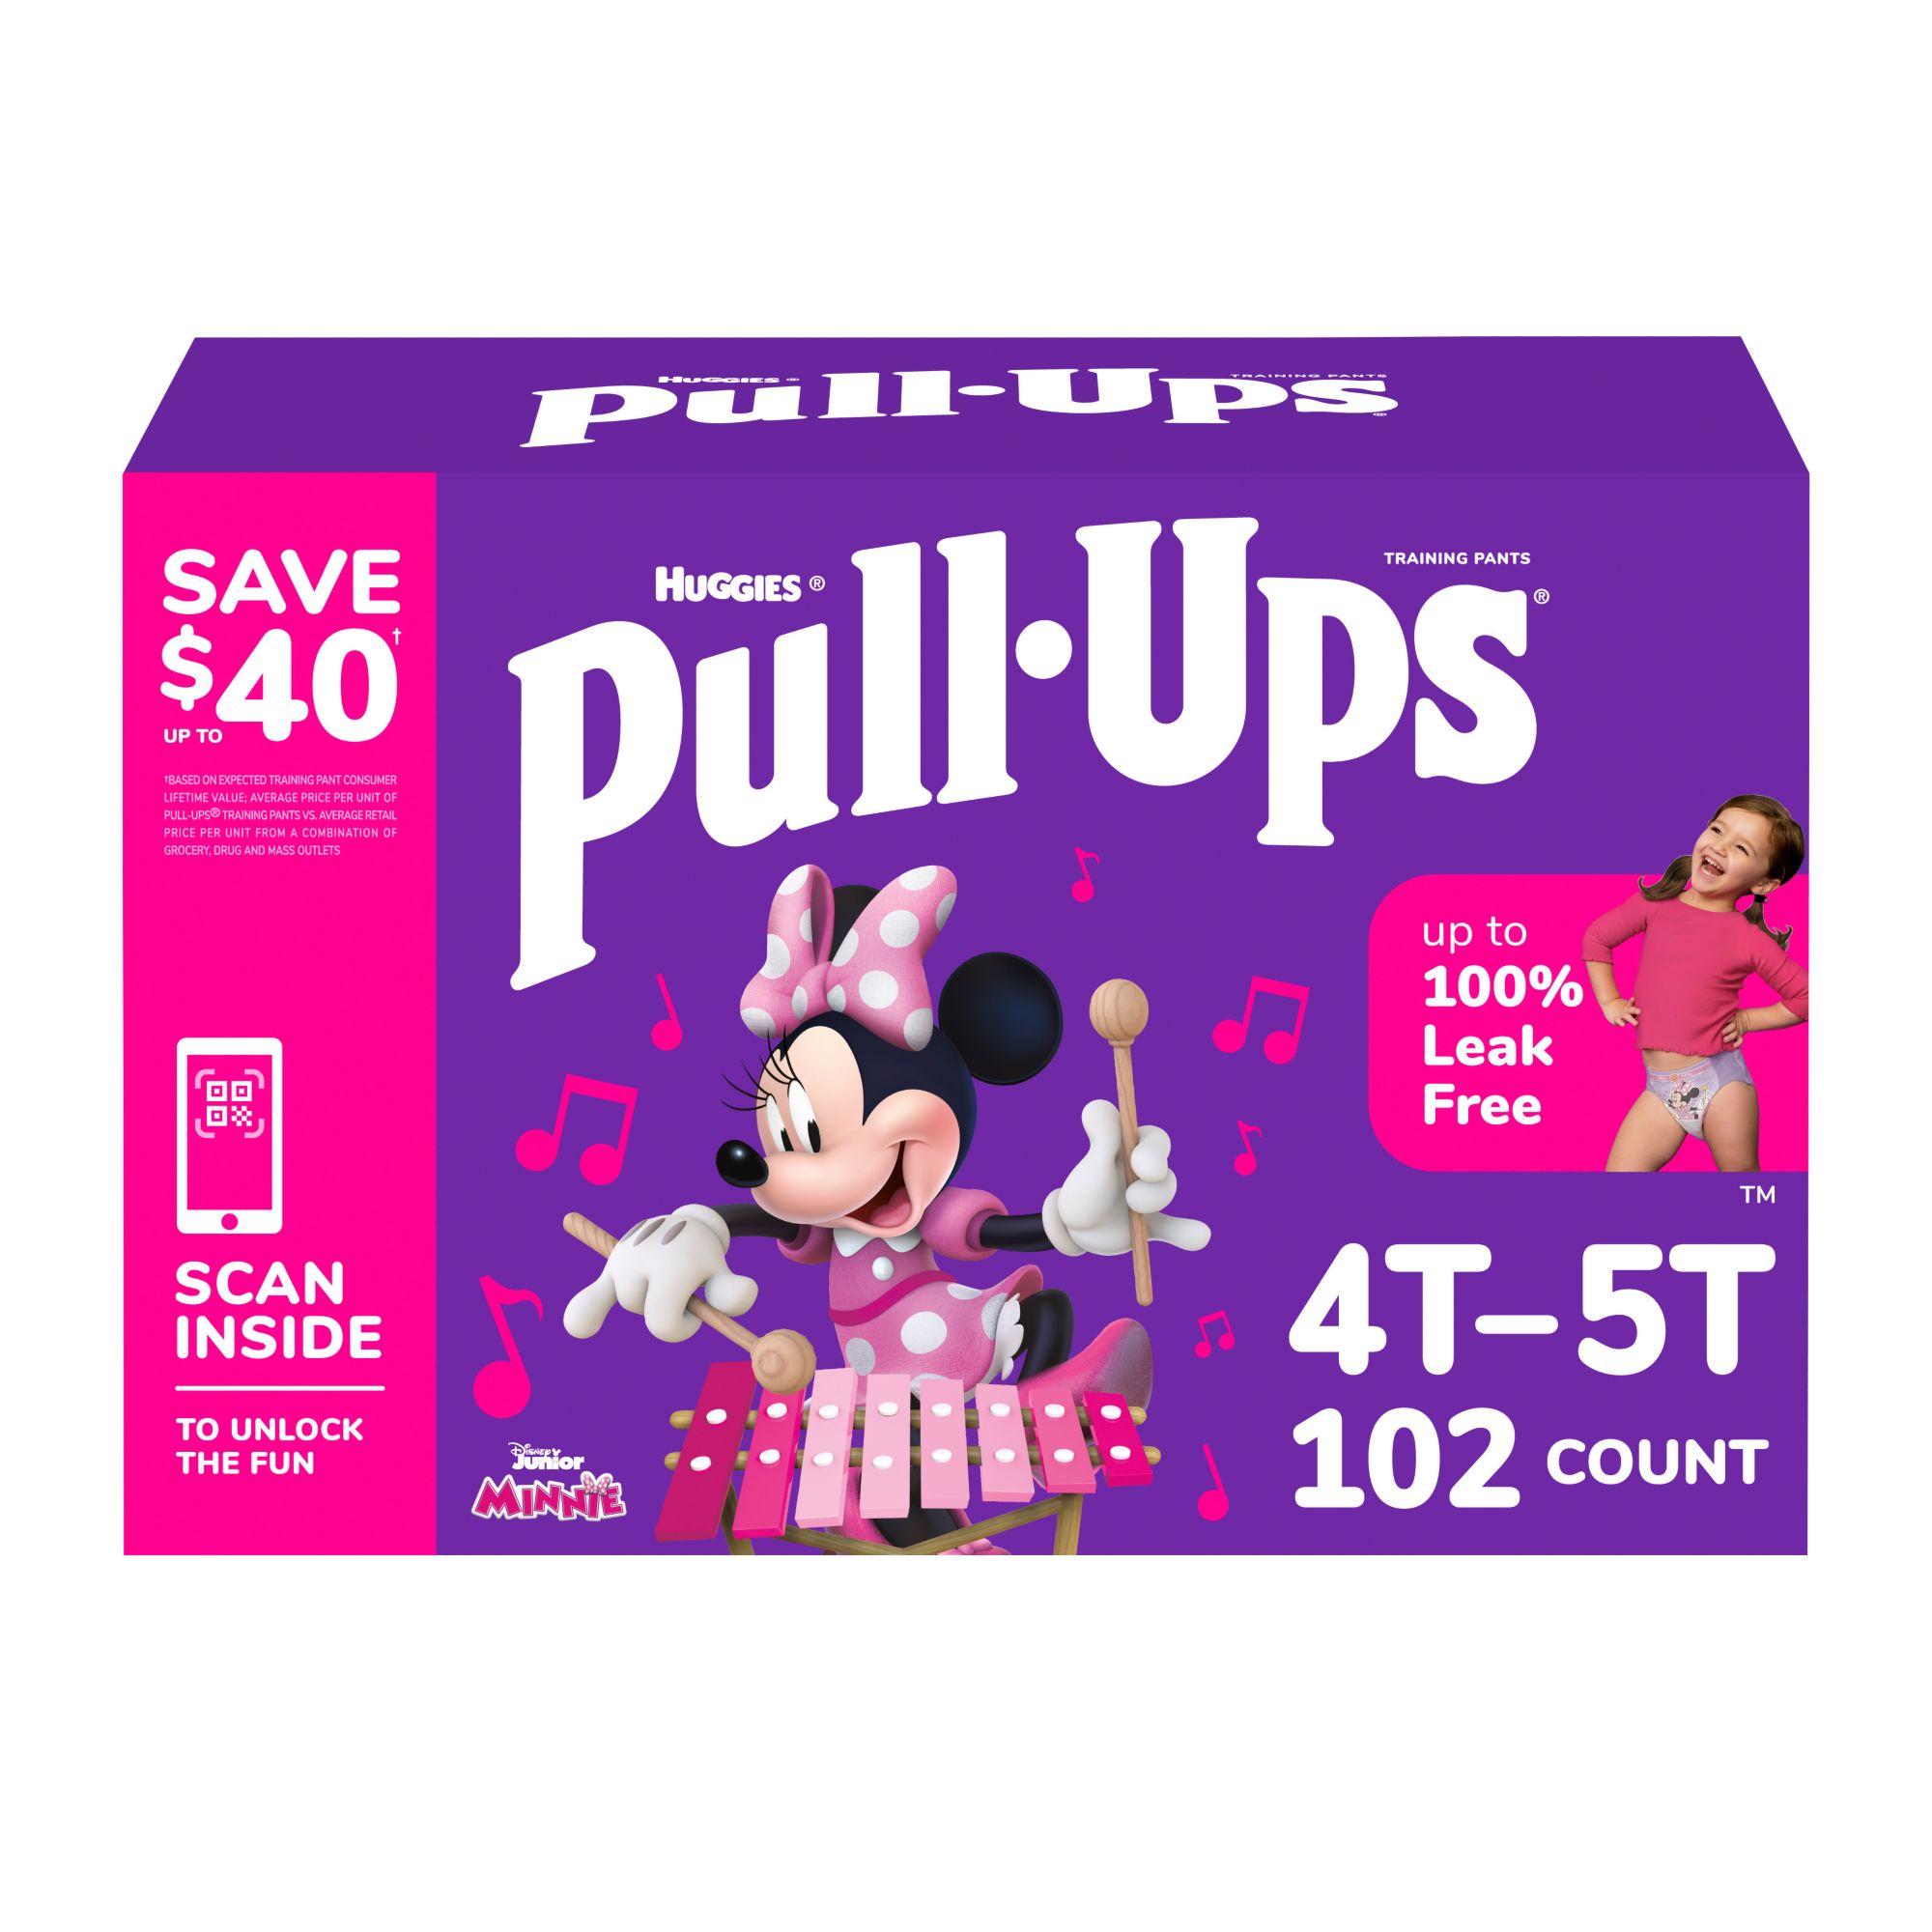 Huggies Girl Pull-ups Size 5T-6T for Sale in Sewell, NJ - OfferUp